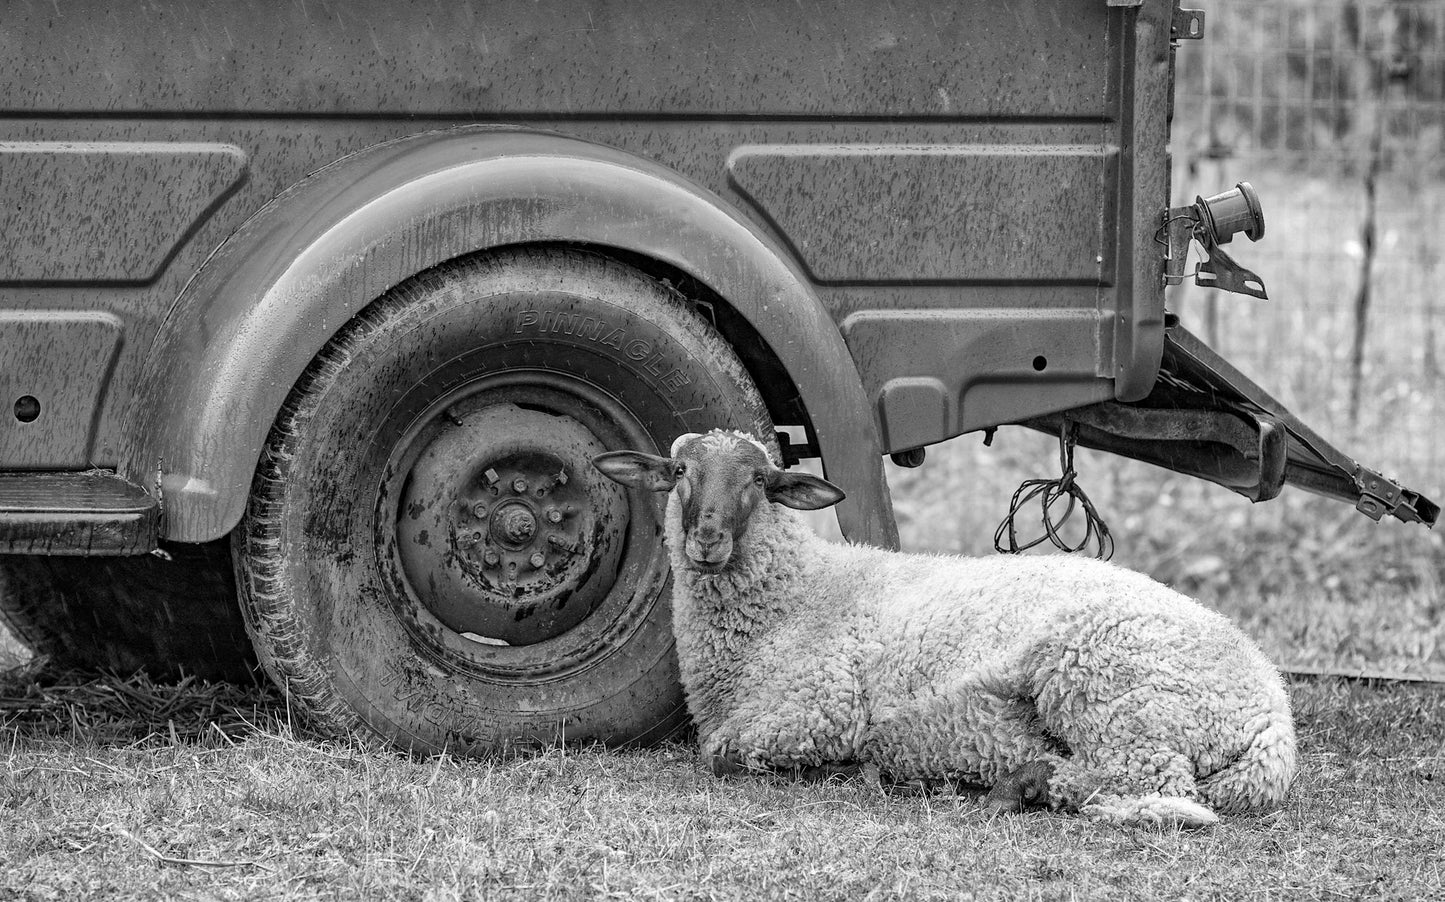 Sheep Next To Old Truck